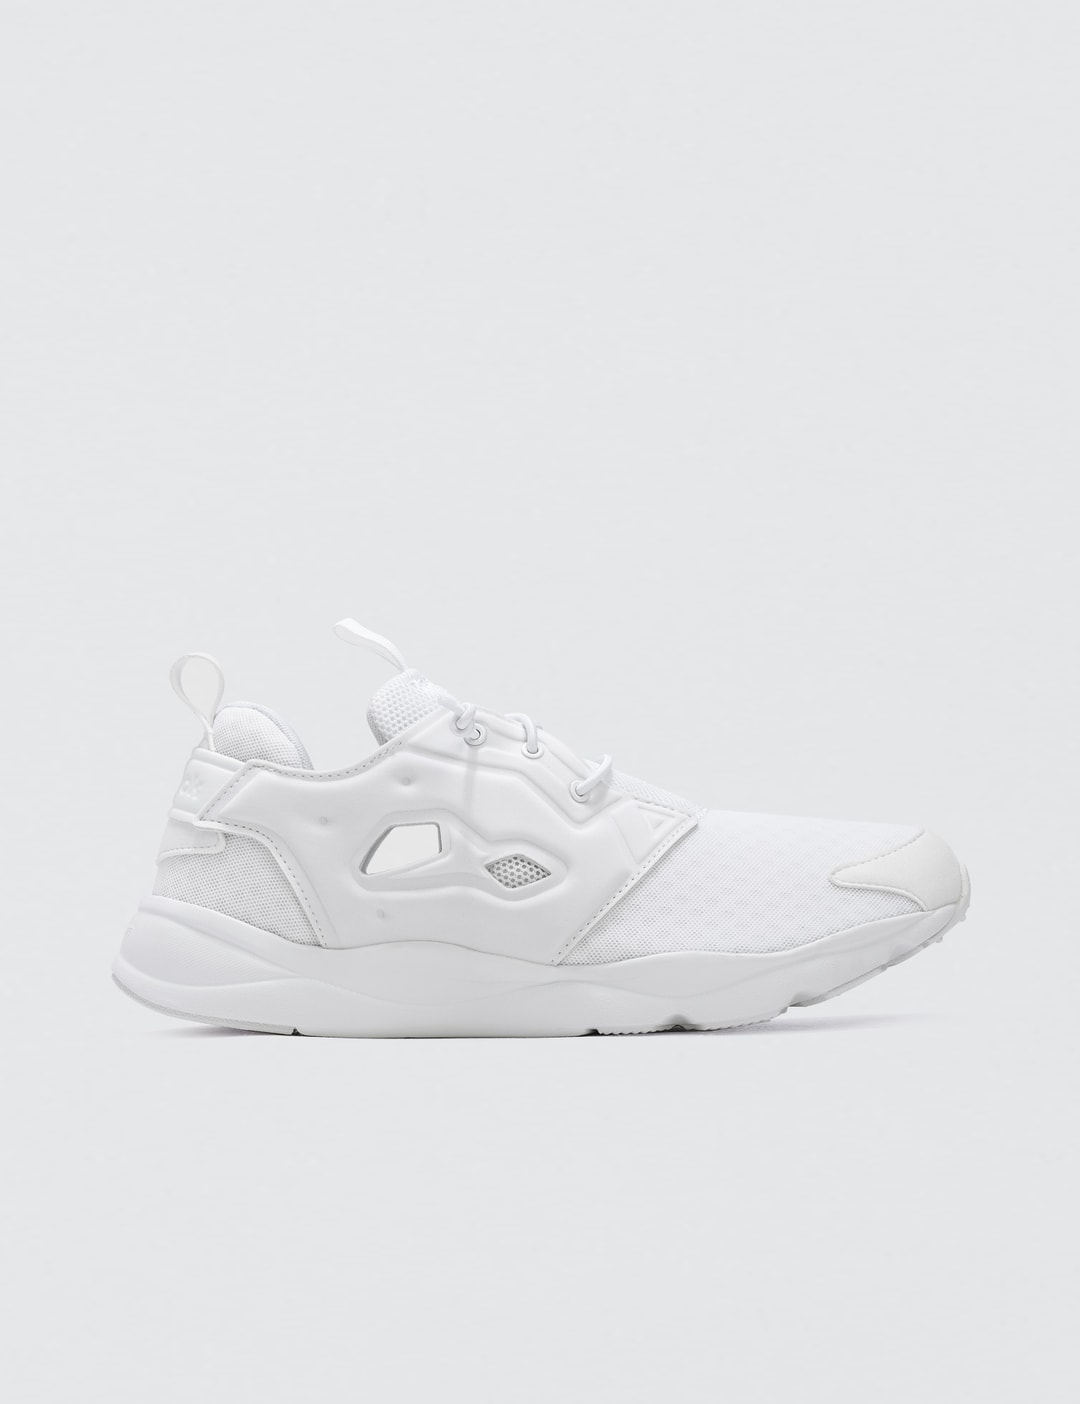 Reebok - Furylite | HBX - Globally Curated Fashion and by